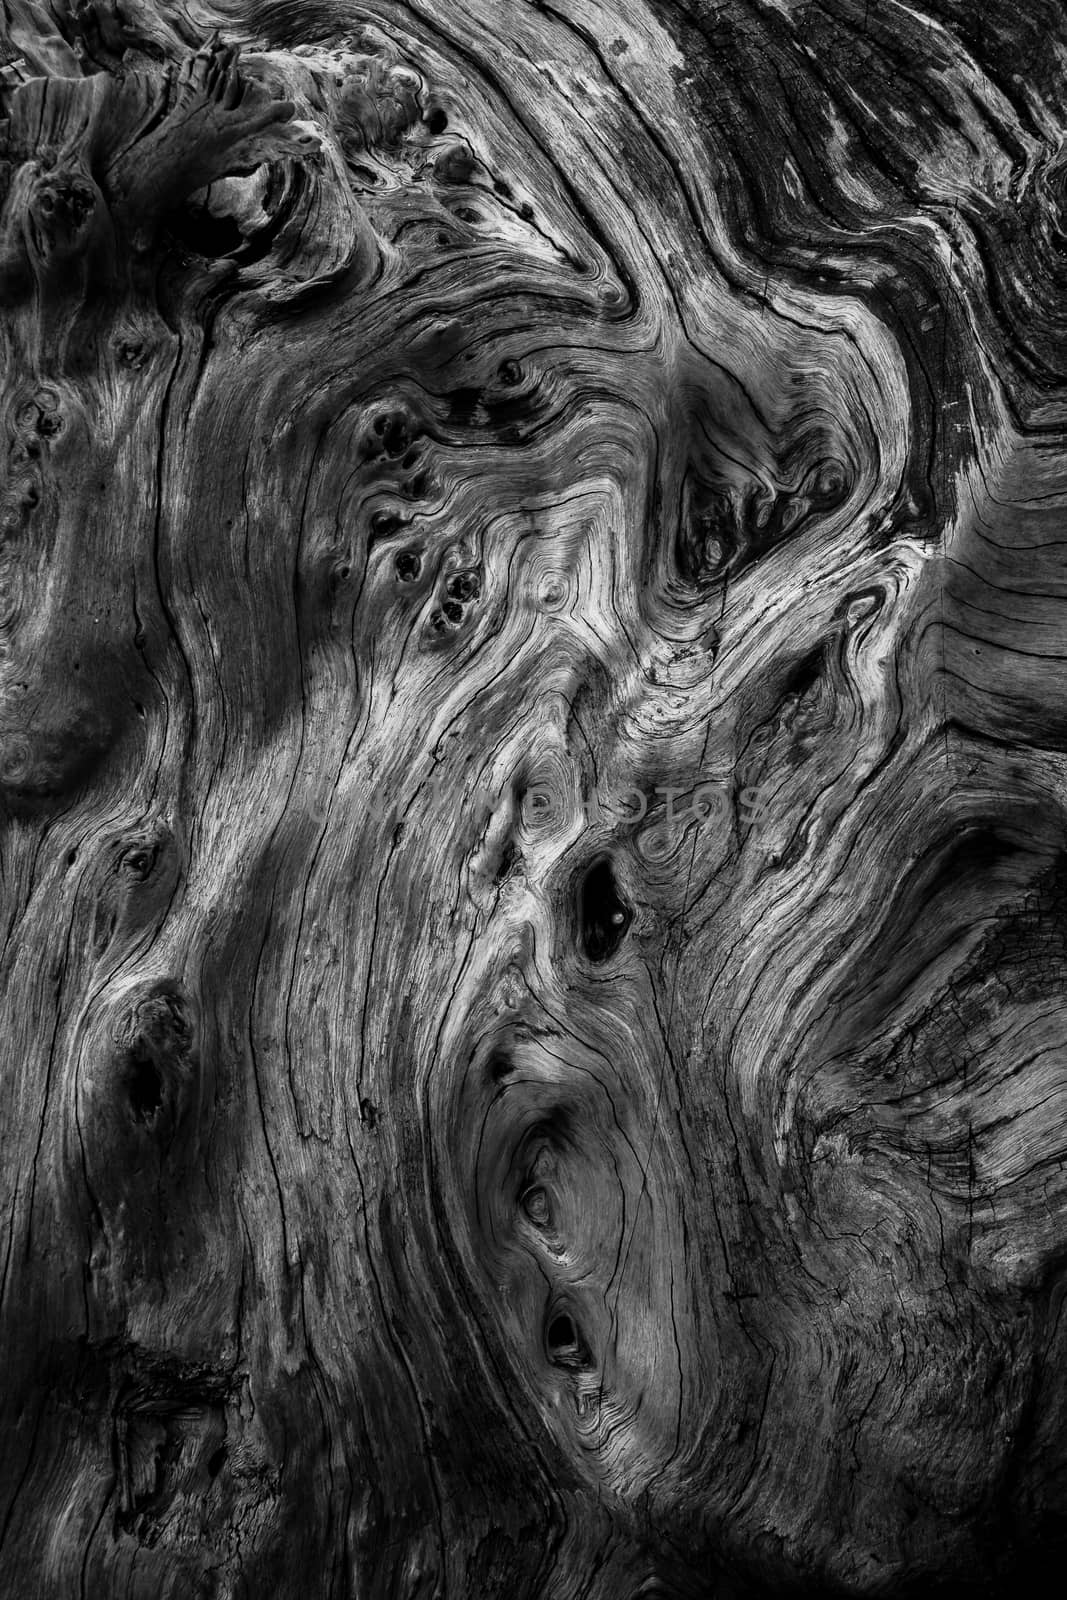 beauty of textures and shapes on the wood